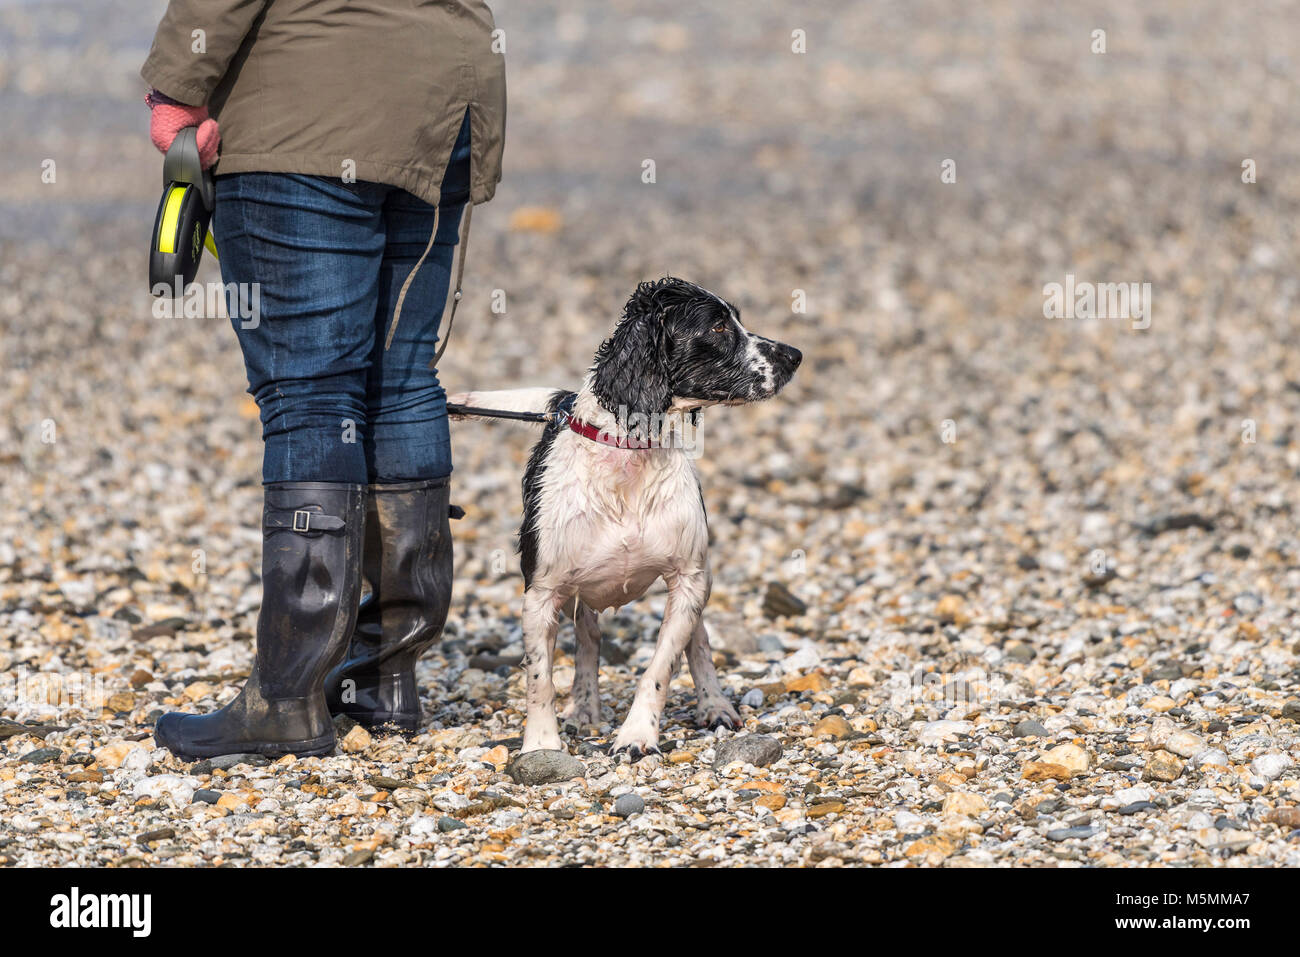 A dog Cocker Spaniel standing on a beach with its owner Stock Photo